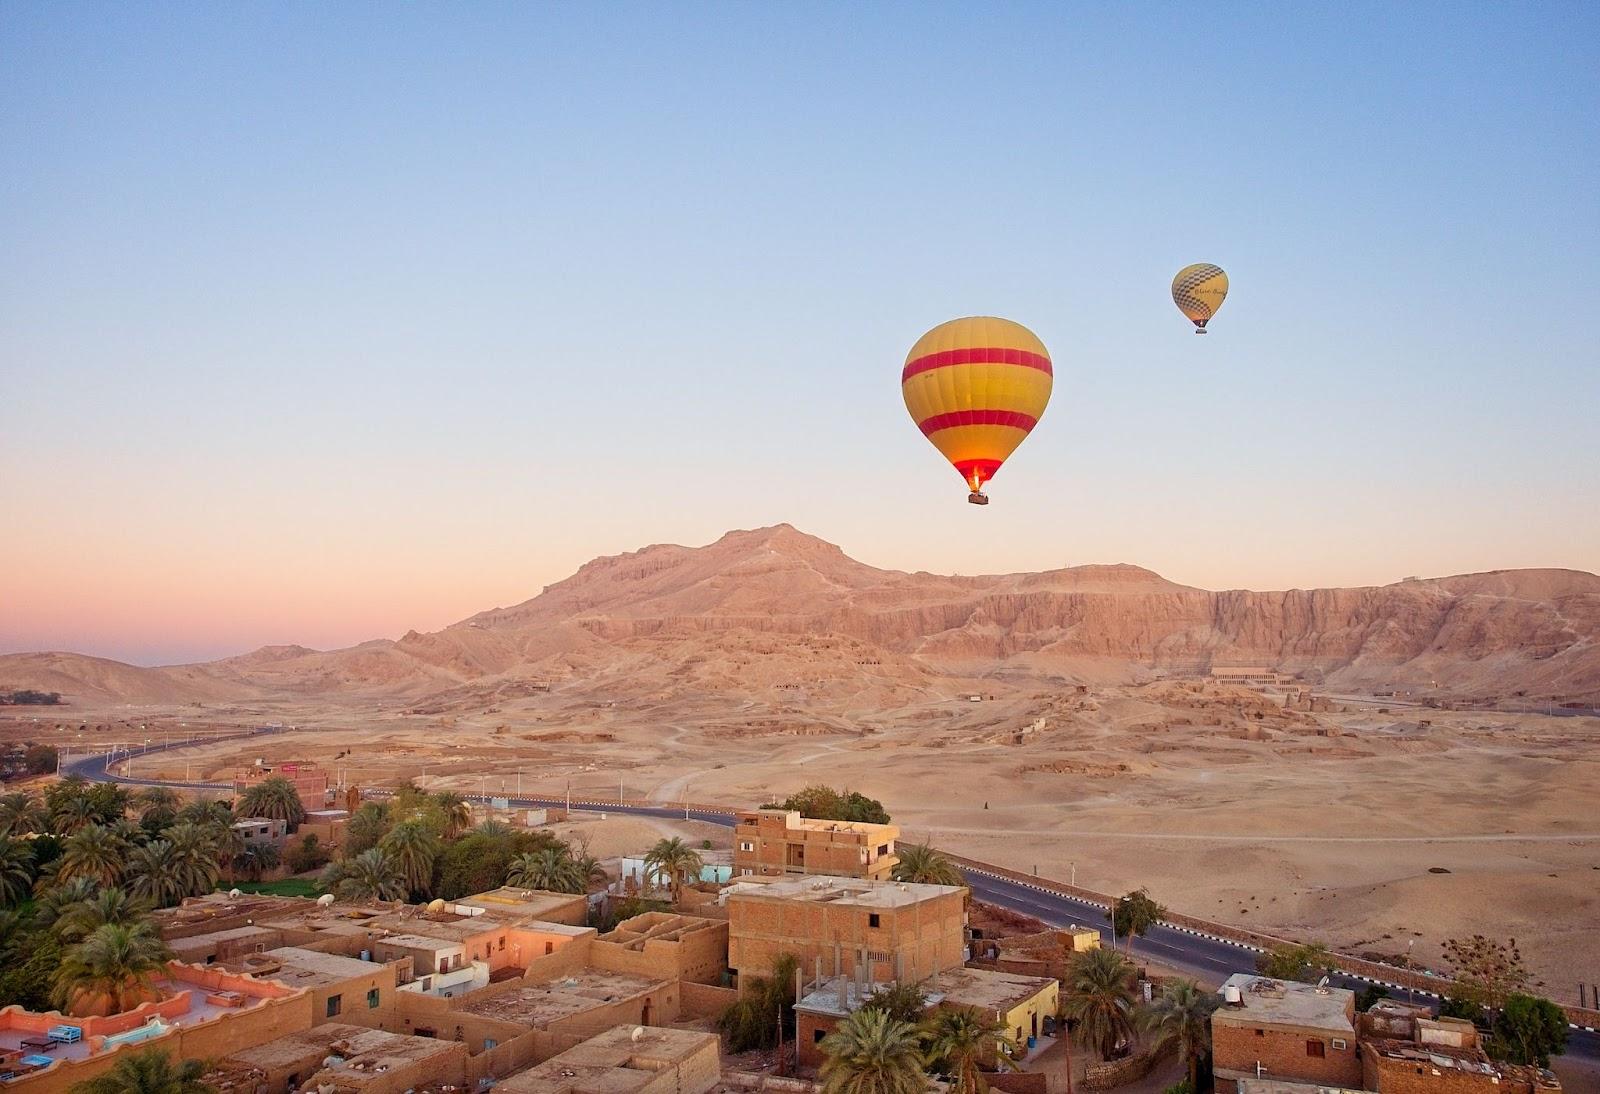 Hot air balloons over the city of Luxor